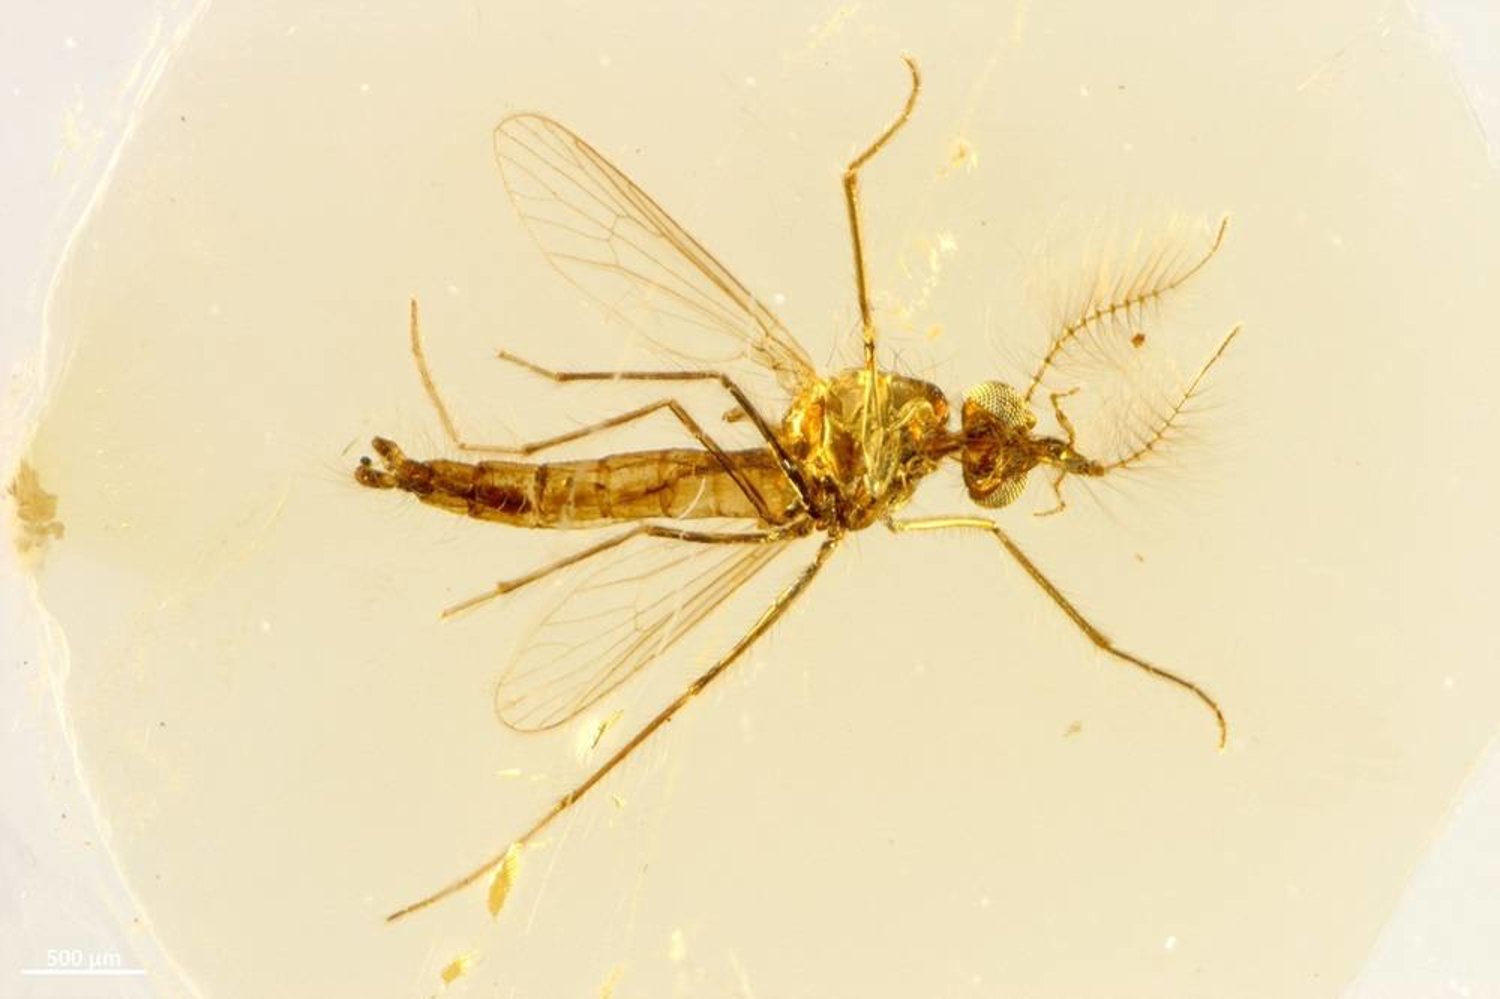  An undated handout image of a view from above of the body of a fossilized male mosquito trapped in amber found in central Lebanon dating to about 130 million years ago. (Dany Azar/Handout via Reuters)